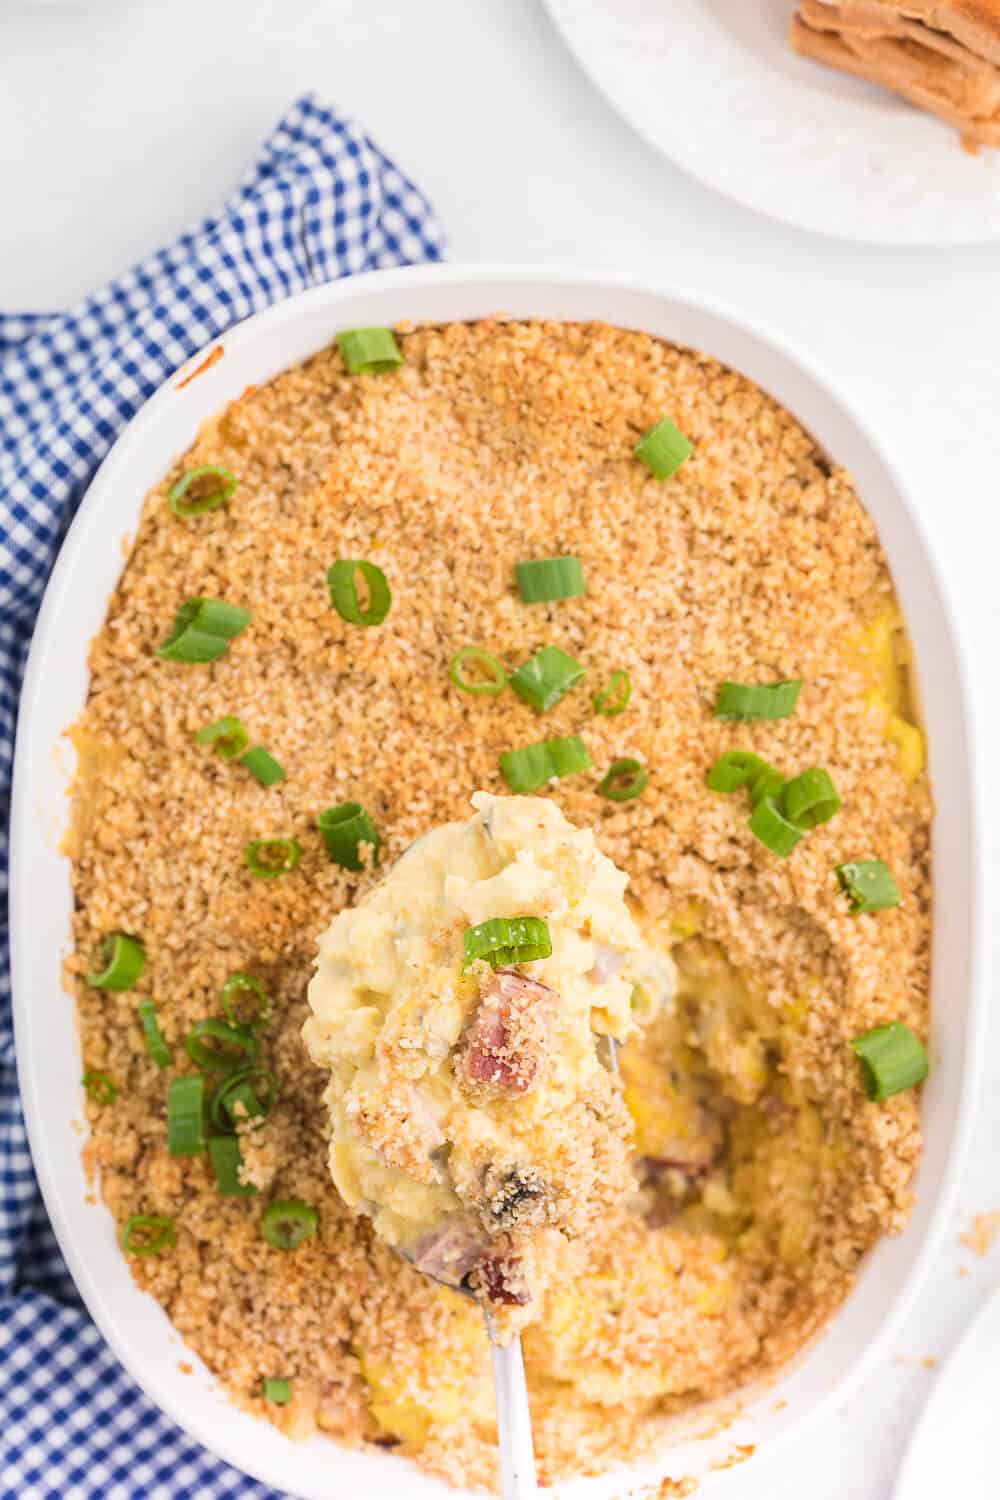 Scrambled Egg Casserole - Soft oven-scrambled eggs with ham, green onion, cheddar and mushrooms are baked under a crispy, toasted layer of bread crumbs. A delicious and decadent change from bread-based breakfast casseroles.